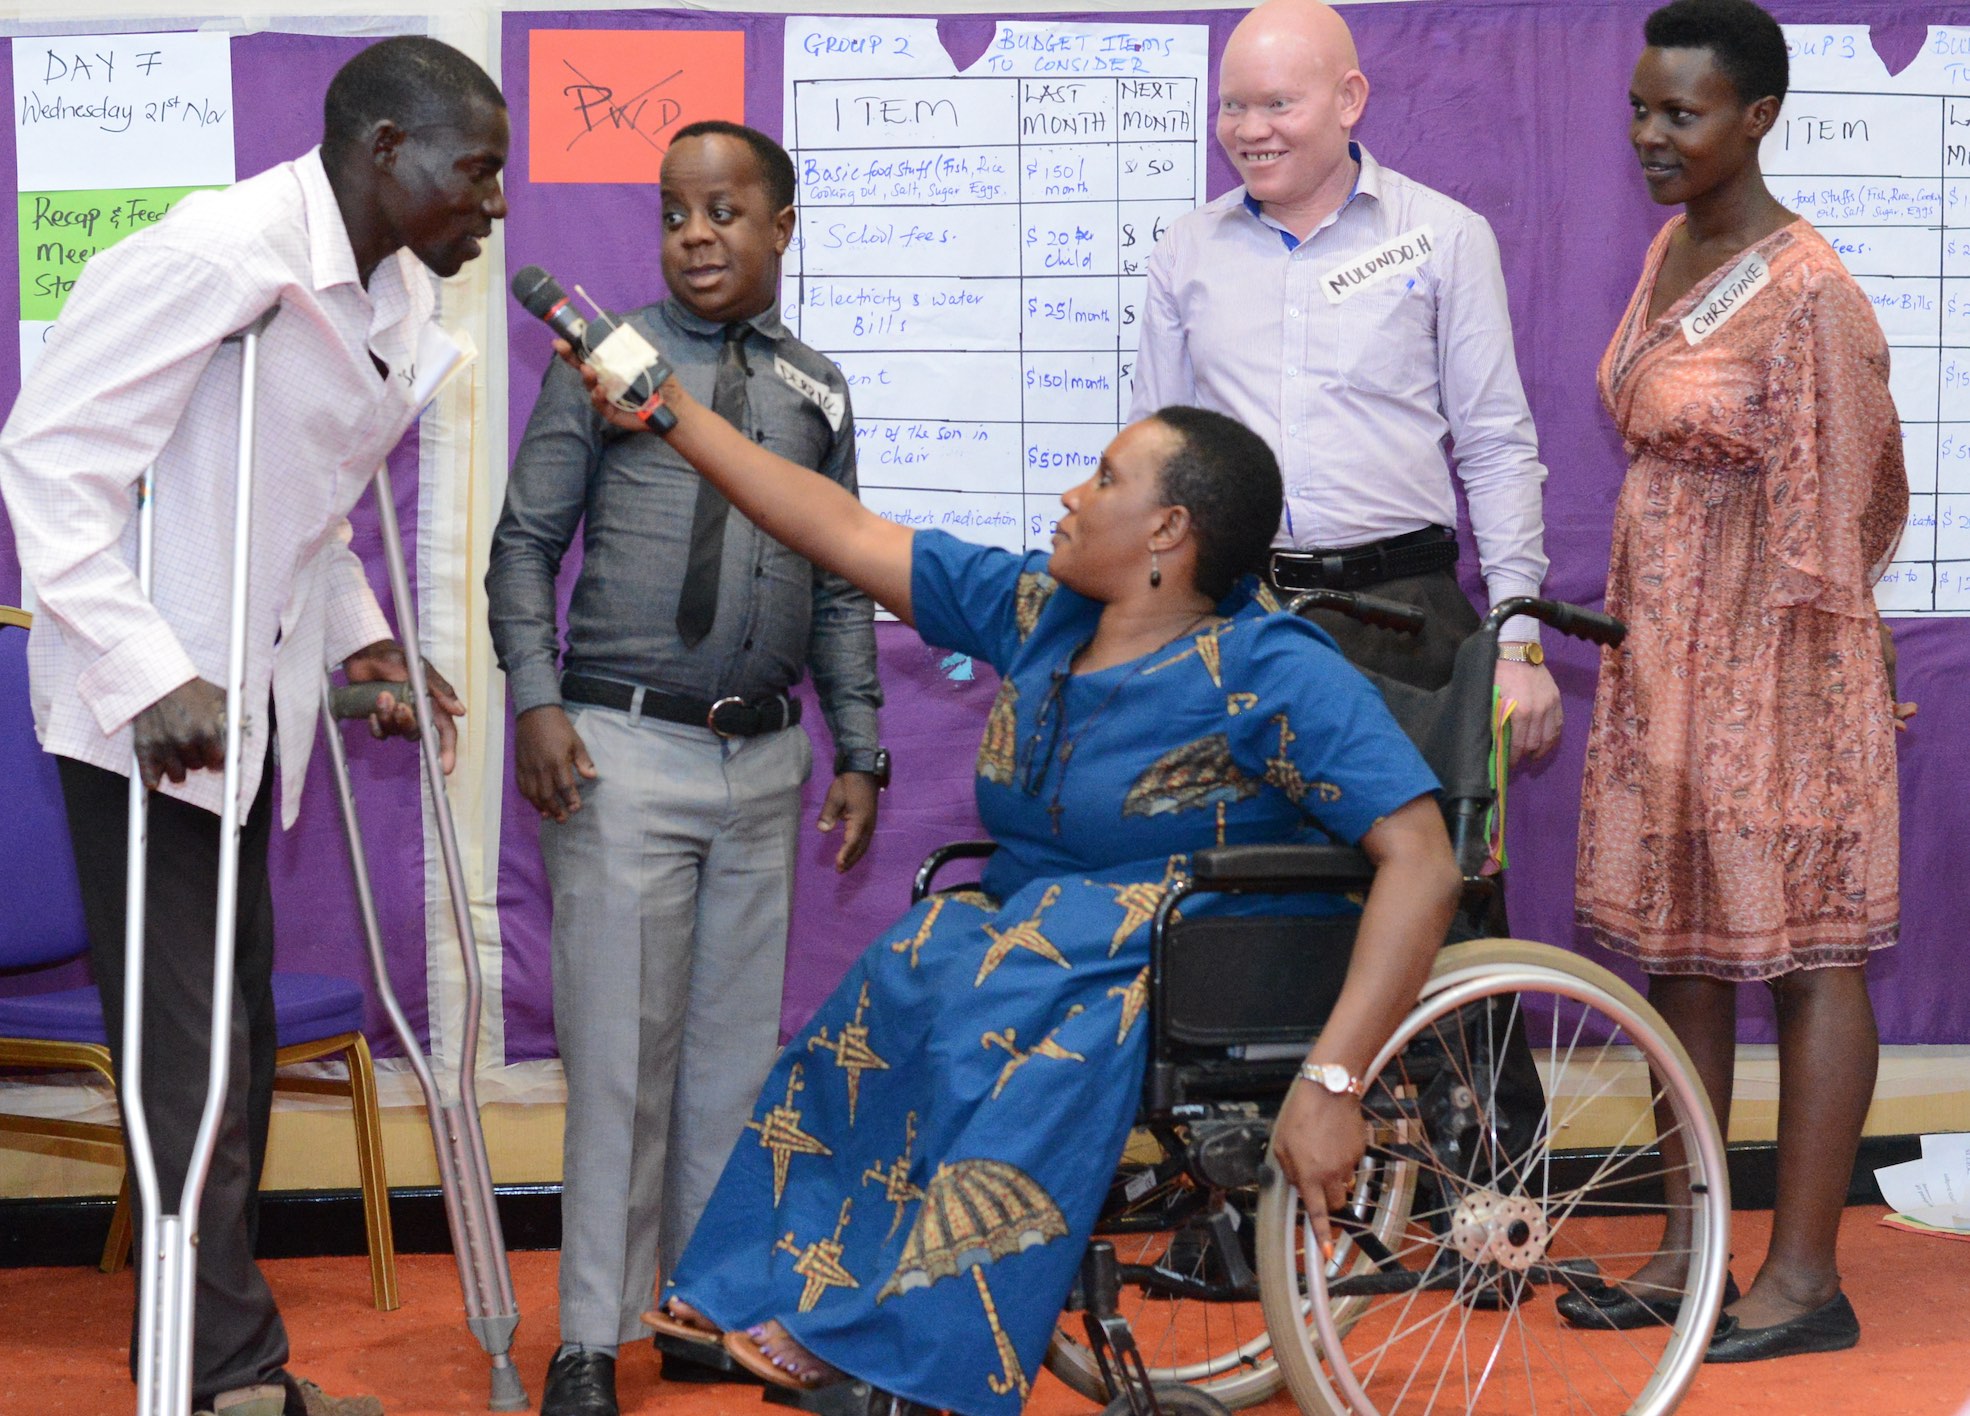 Participants at a GDS meeting. A lady wheelchair user holds a microphone to a man who is speaking. Three other participants stand next to them smiling. 